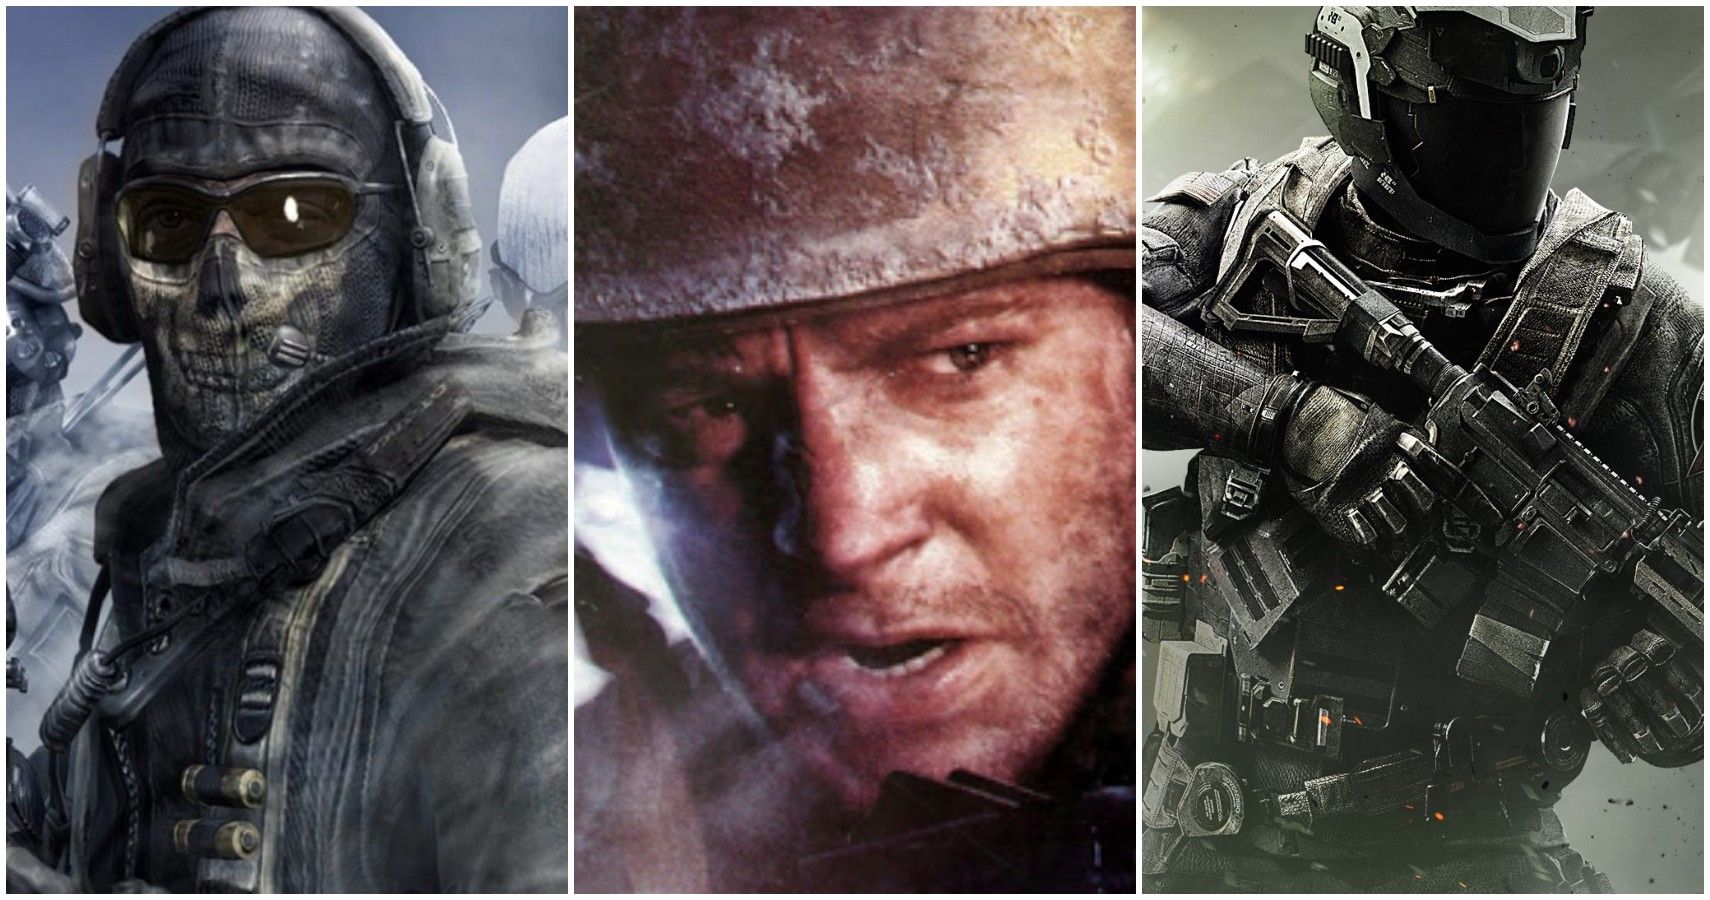 Let's Rank The Call of Duty Games, From Worst To Best